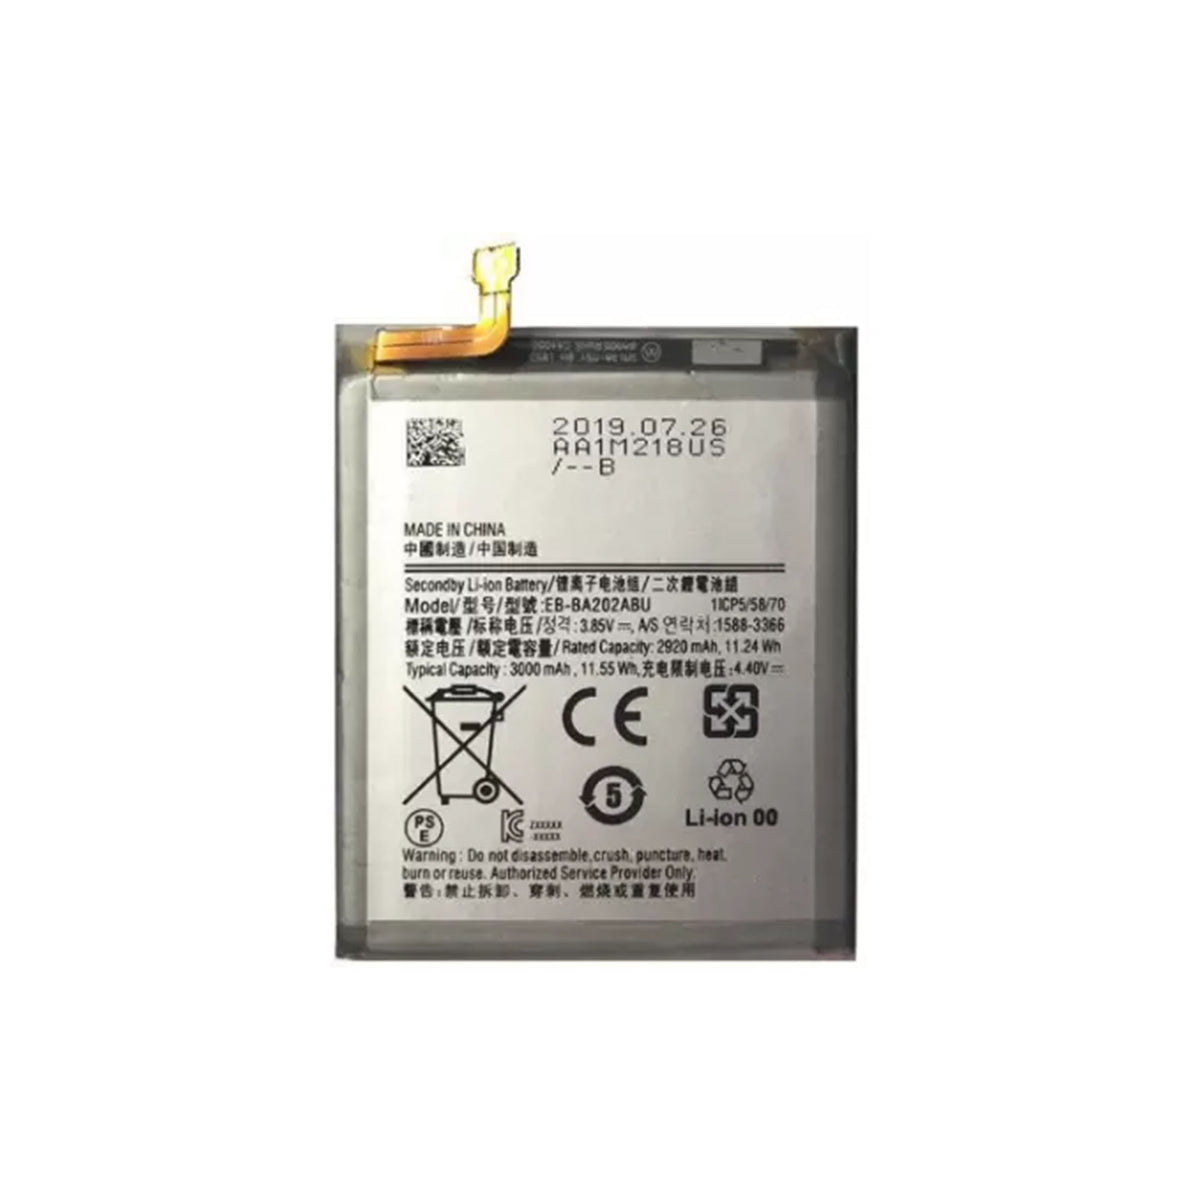 MOBILE BATTERY FOR SAMSUNG GALAXY A20 - EBBA202ABU